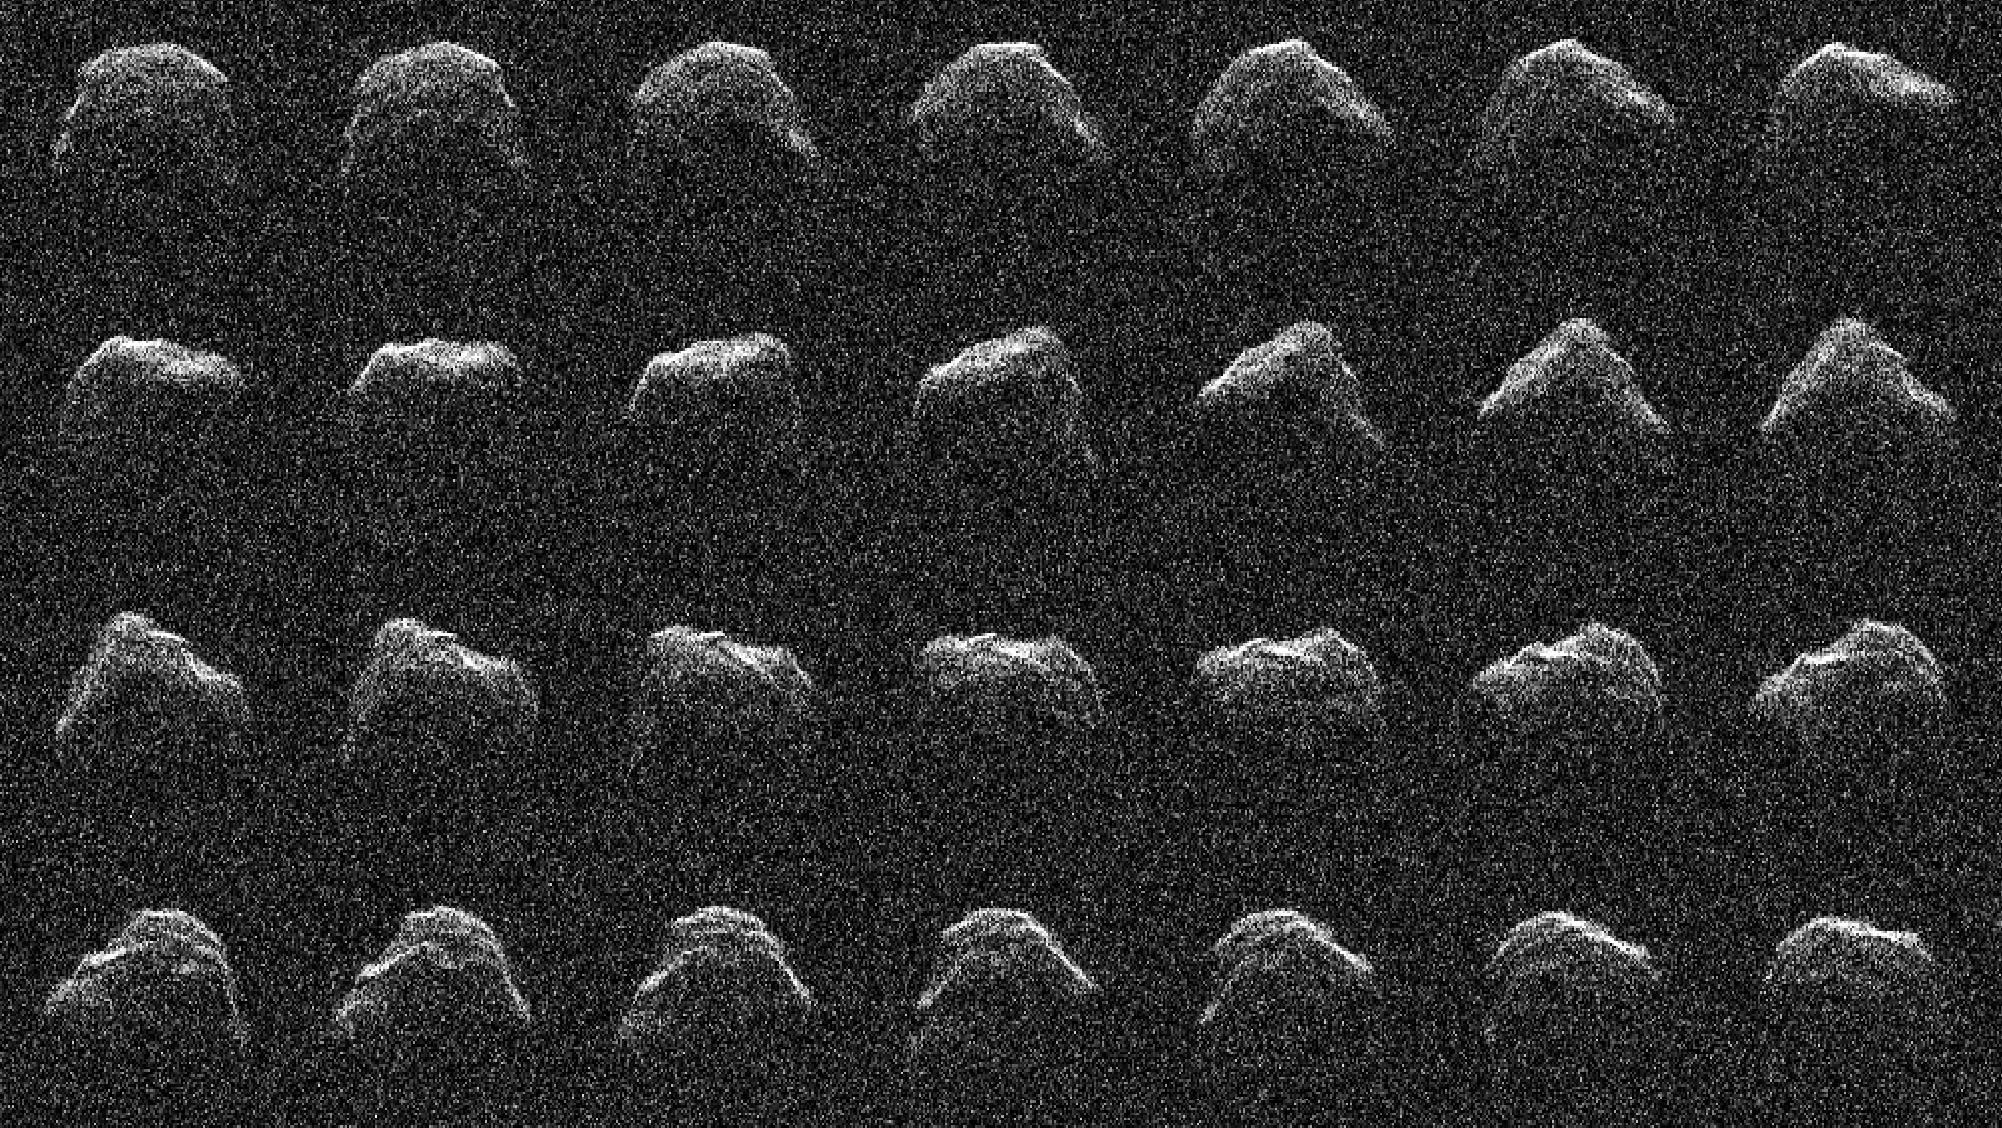 PIA24564: Radar Reveals the Surface of Asteroid 2016 AJ193